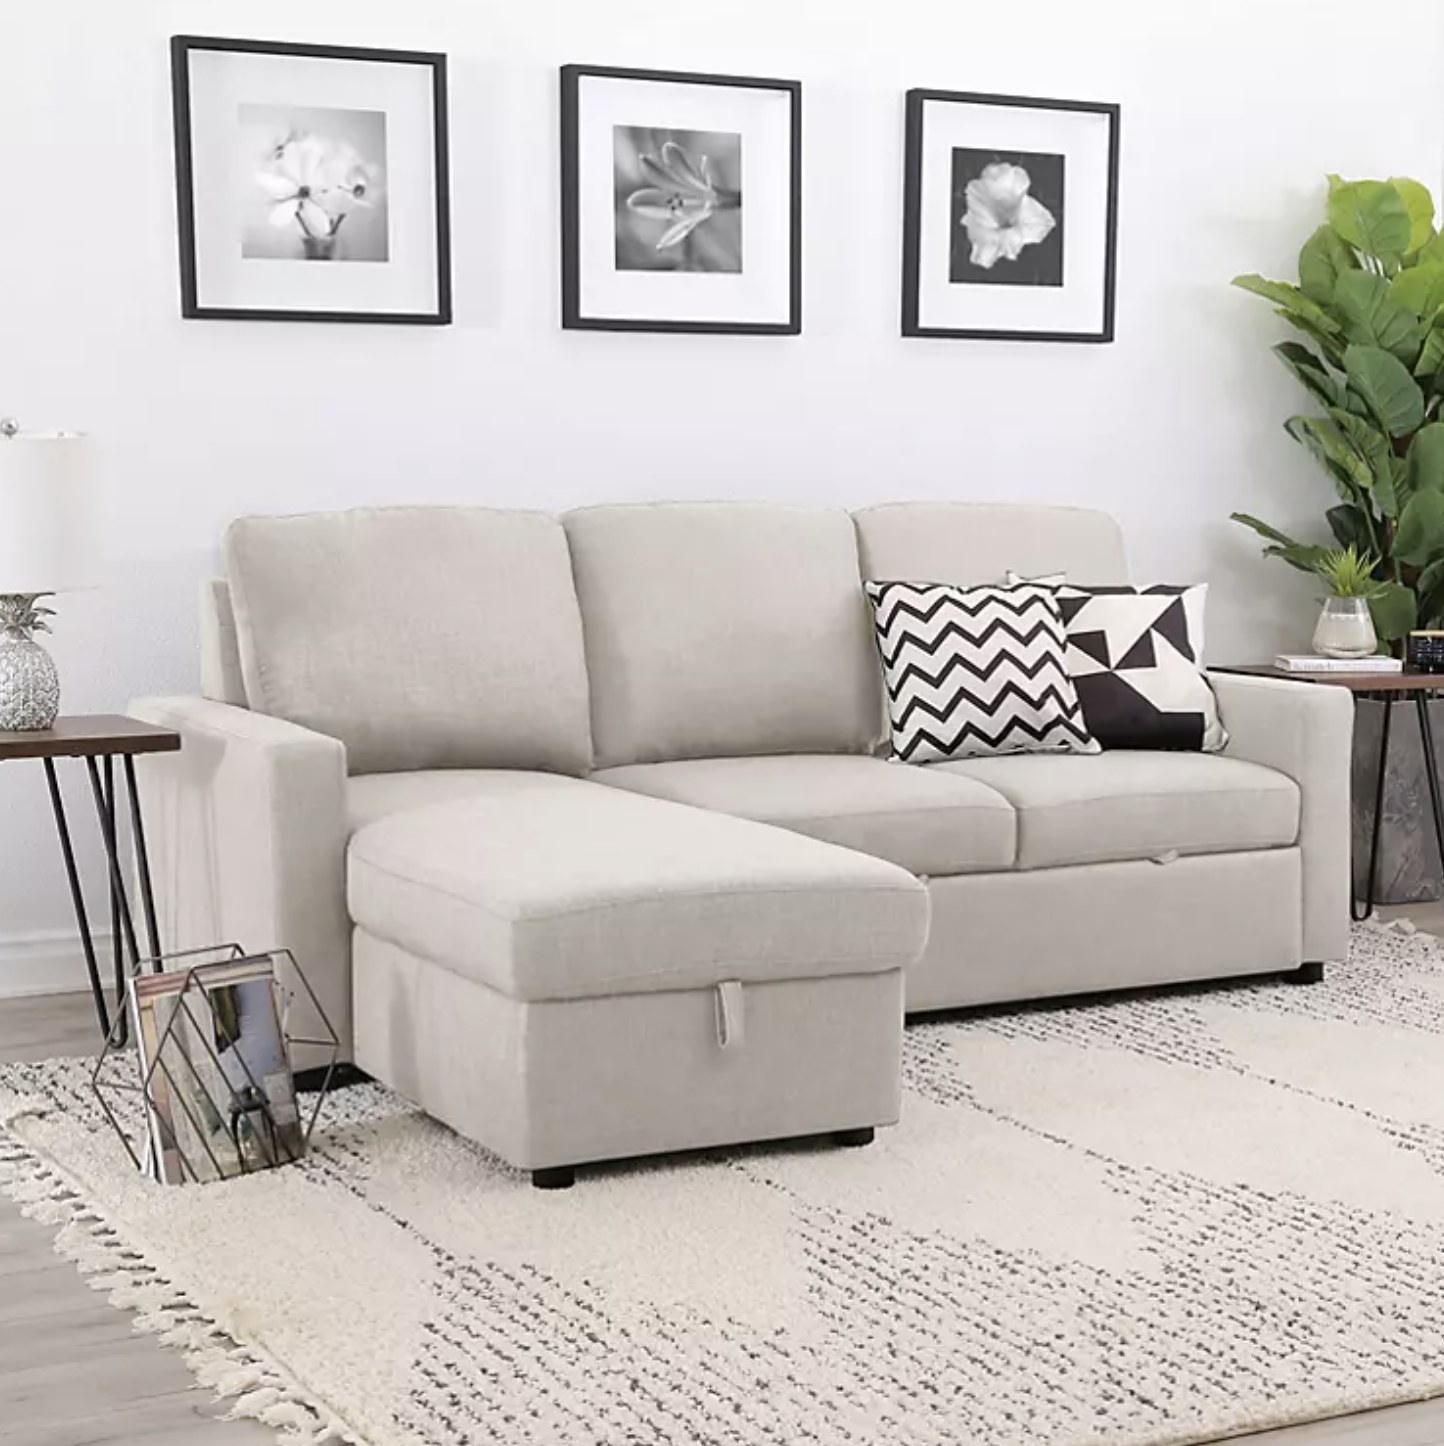 If You're Looking For A New Couch, Here Are 15 Reviewer-Loved Options From Sam's  Club